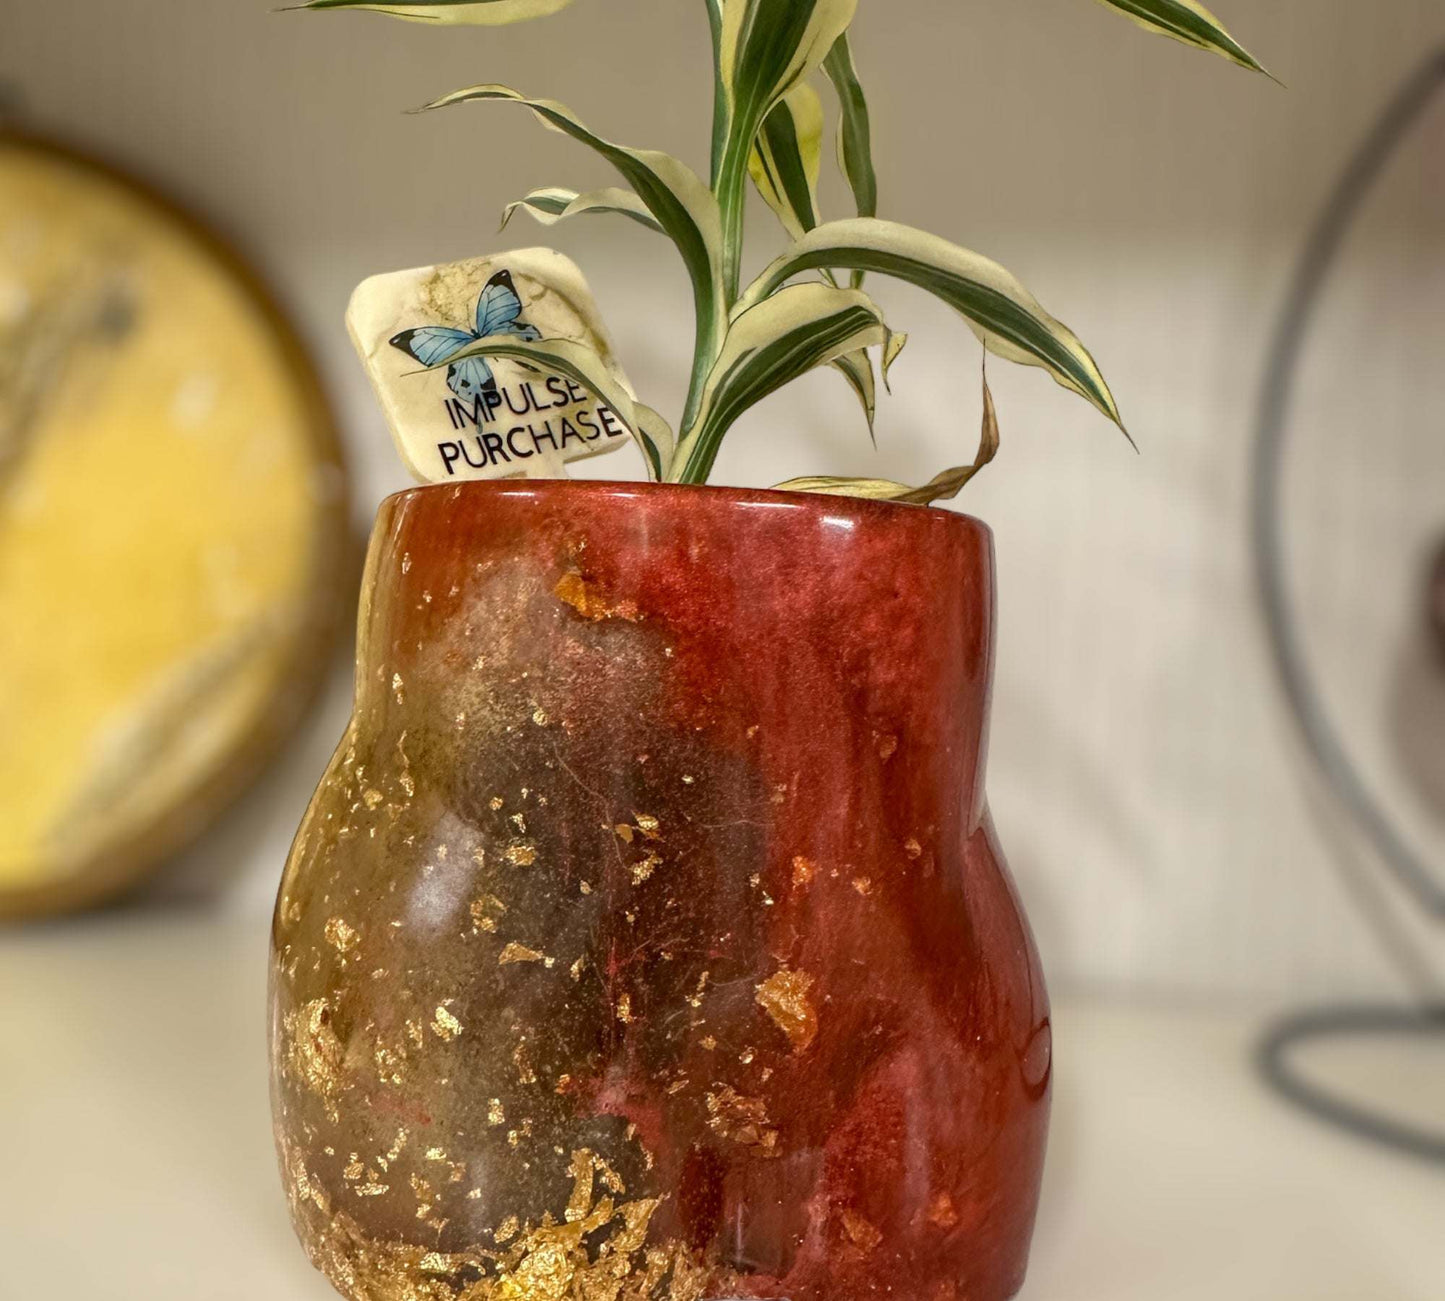 Booty Planters: Playful Epoxy Resin Planters for a Cheeky Touch 